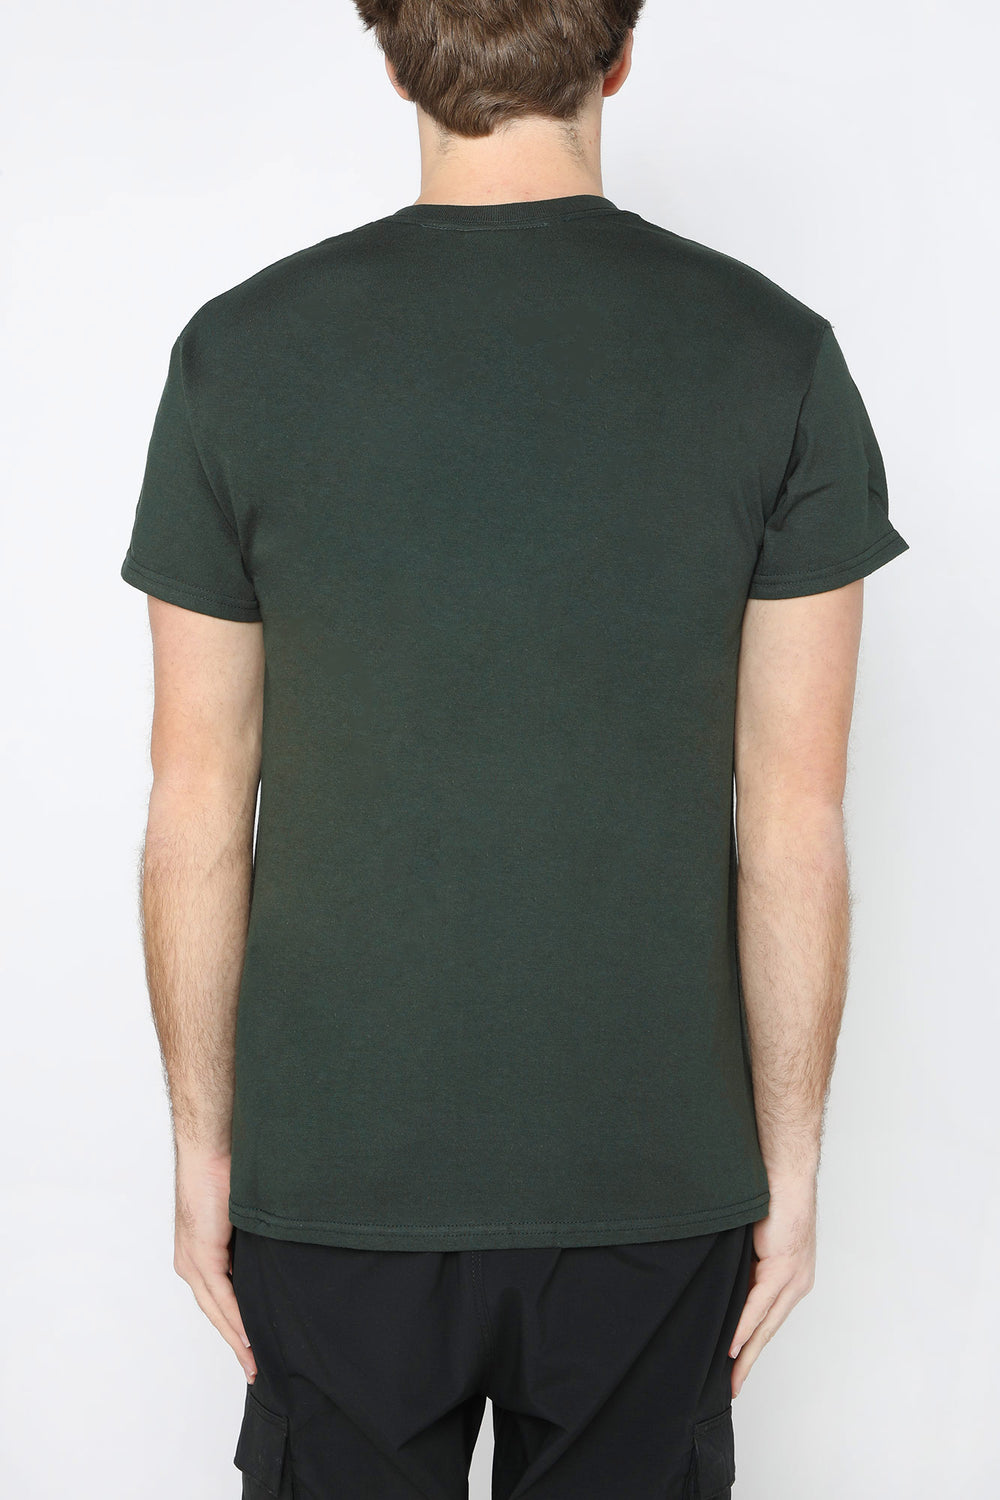 T-Shirt Trinity Grizzly Vert fonce